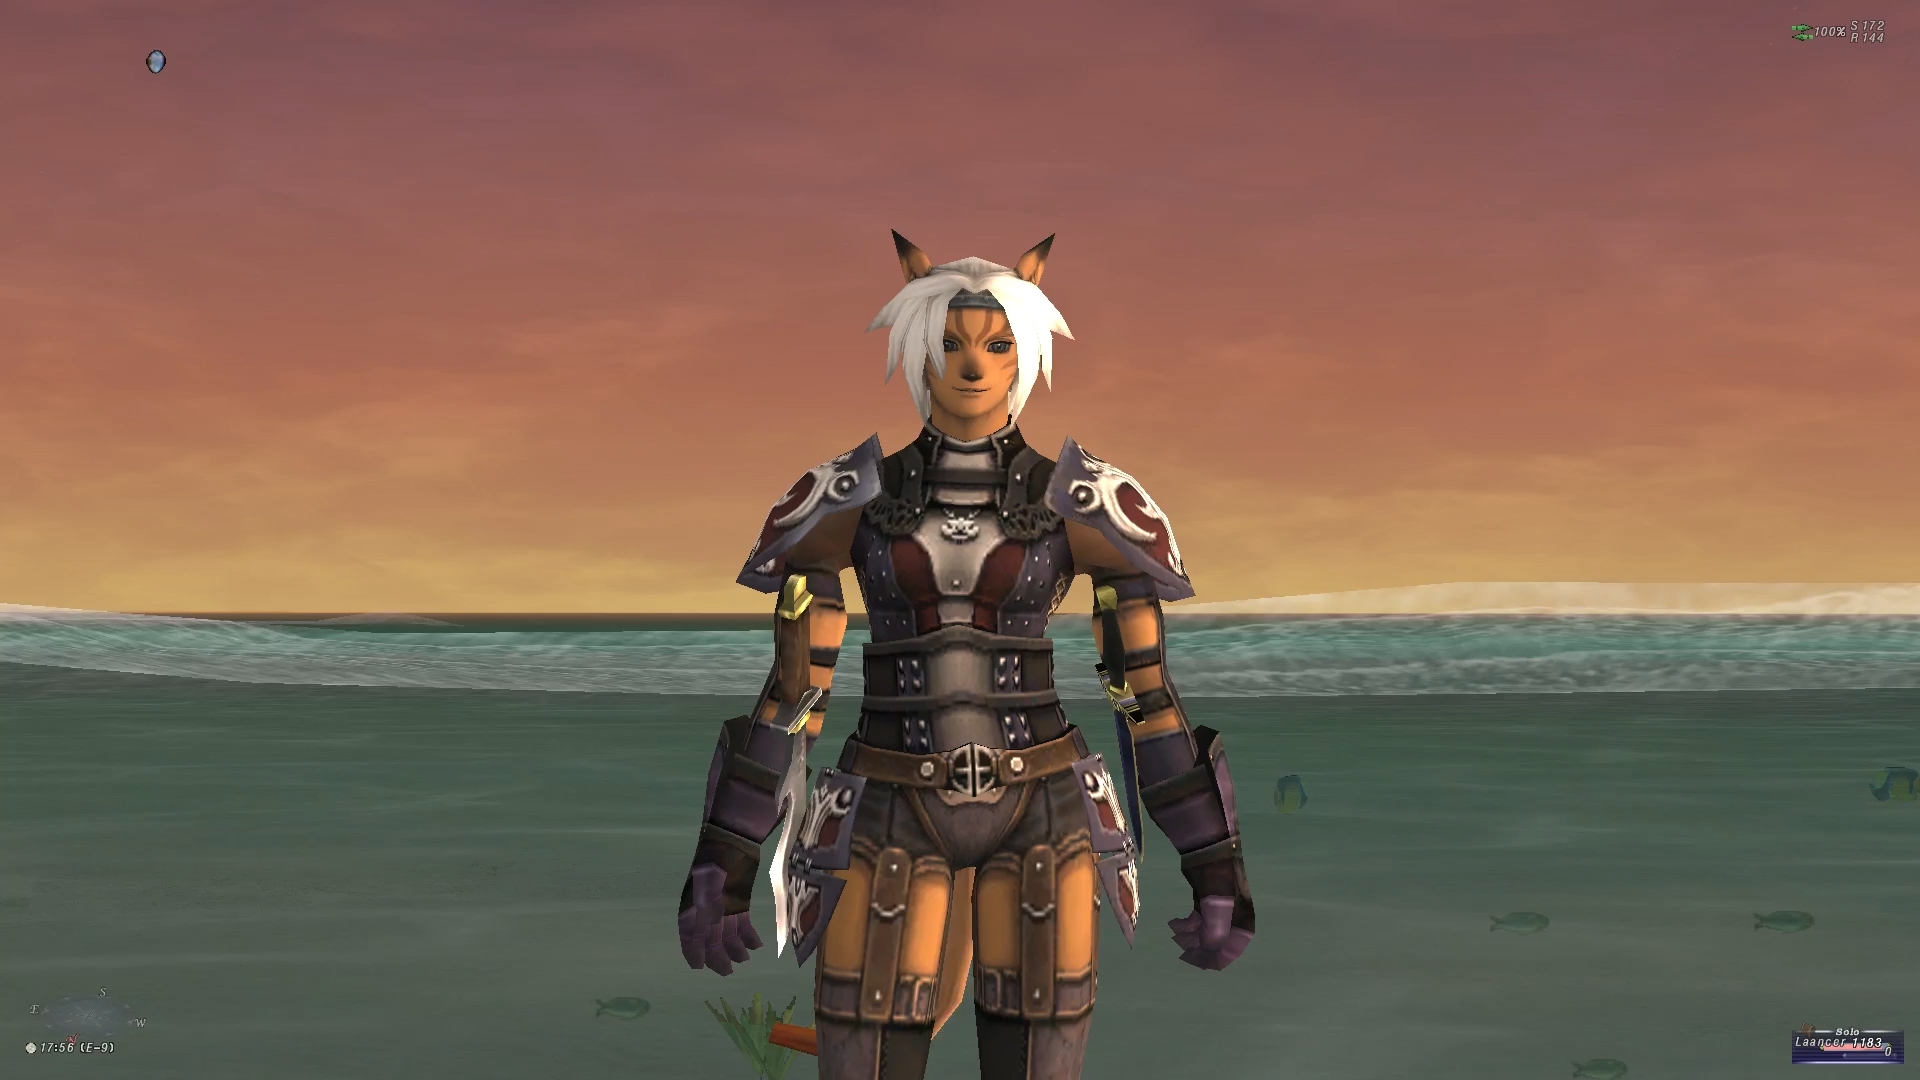 front-view of videogame character. the feminine avatar wears a mixture of leather armor with metal accents, and has white hair. The character stands on the shore of a beach with a sunrise in the background.